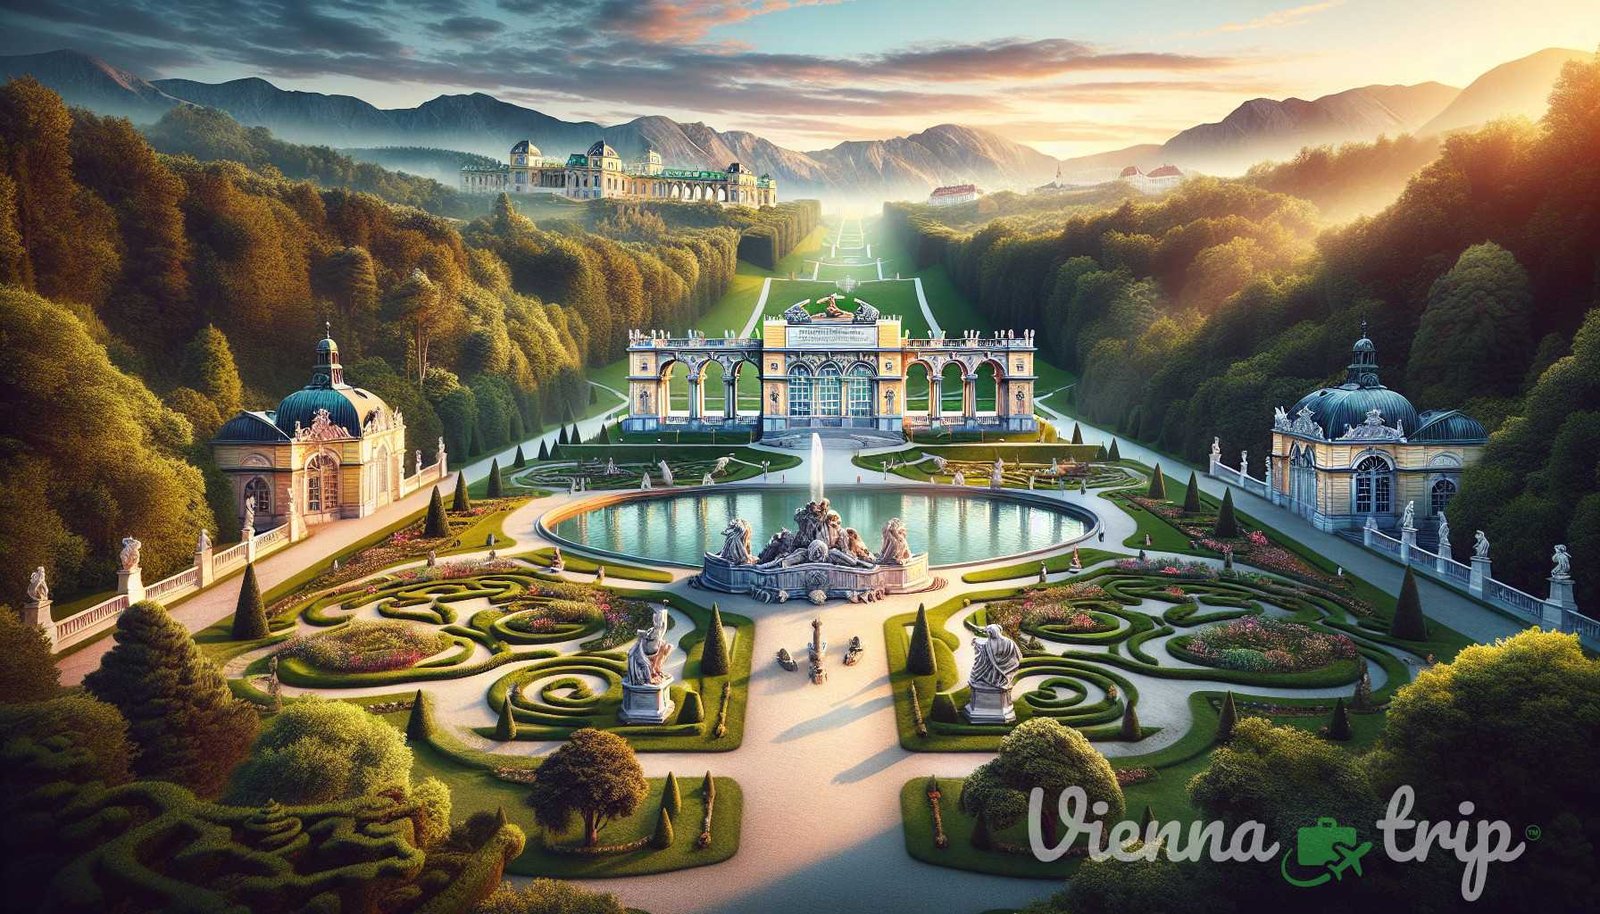 Illustration for section: One of the highlights of the gardens is the gloriette, a magnificent triumphal arch that offers brea - viennas secrets